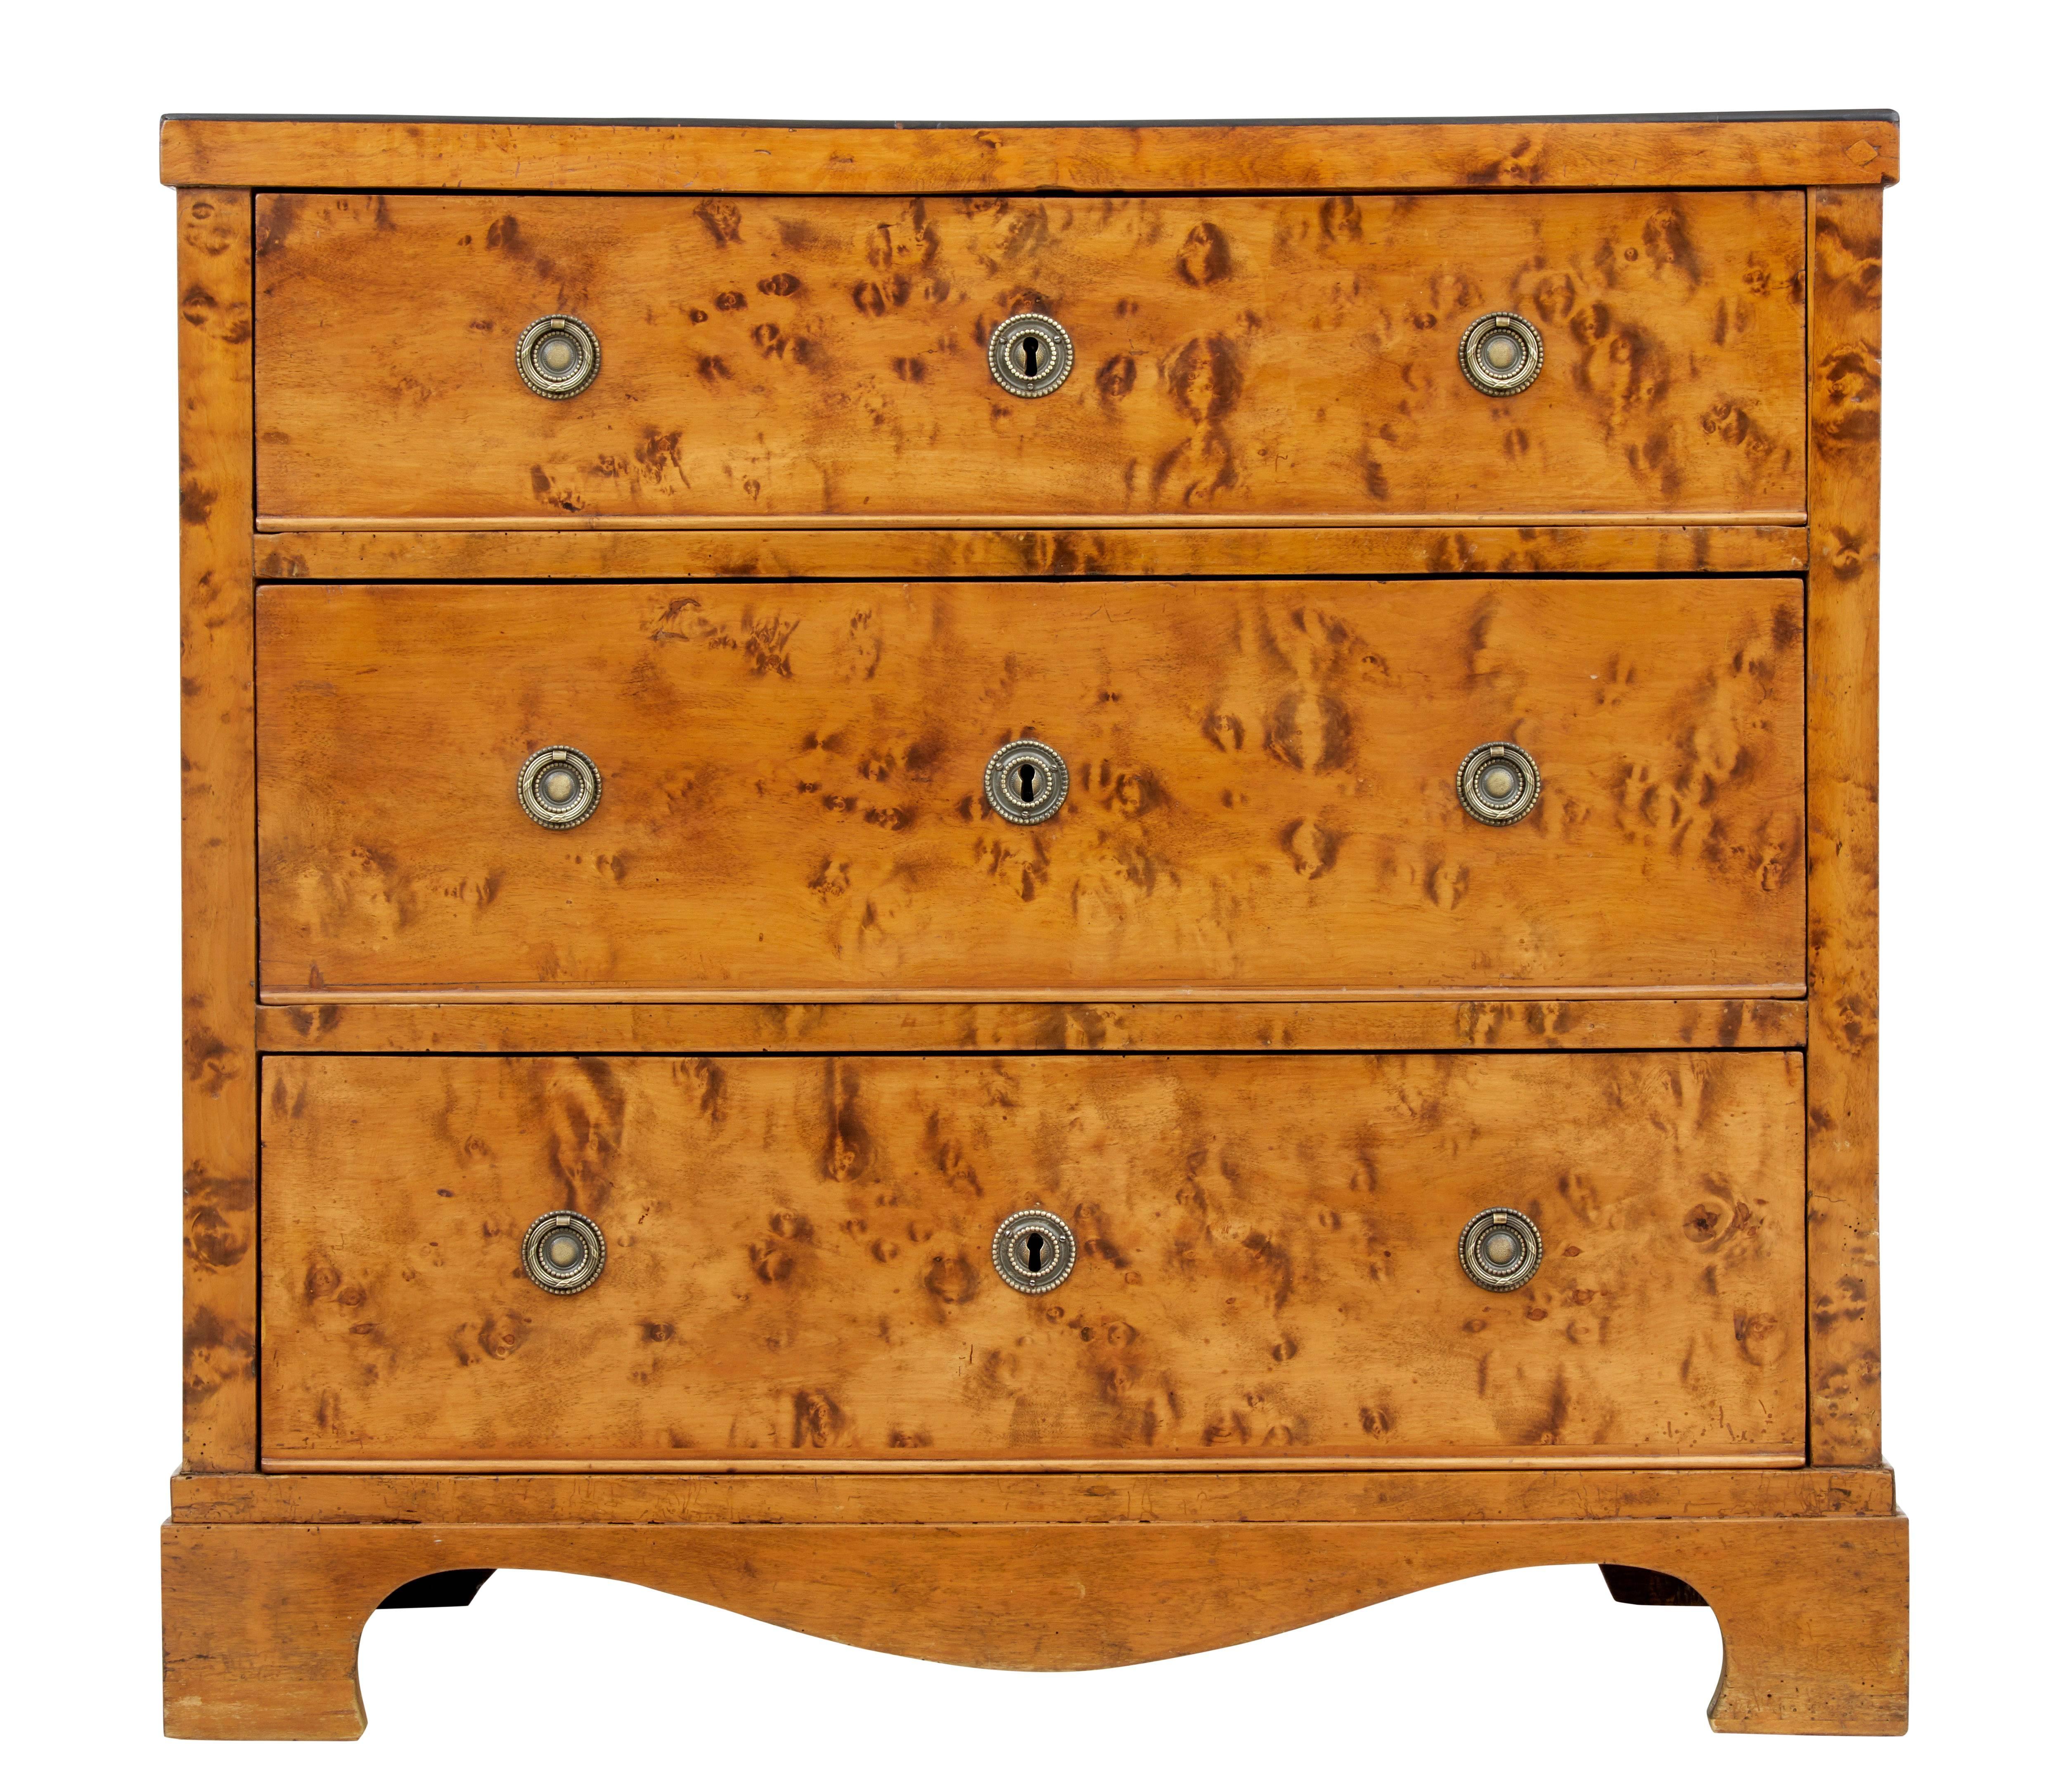 19th century Swedish birch chest of drawers circa 1870.

3 drawers with lower beaded edge, decorative brass looped handles and escutheon plates.

Beautiful burr drawer fronts and ebony edging to top surface.

Standing on bracket feet.

Obvious